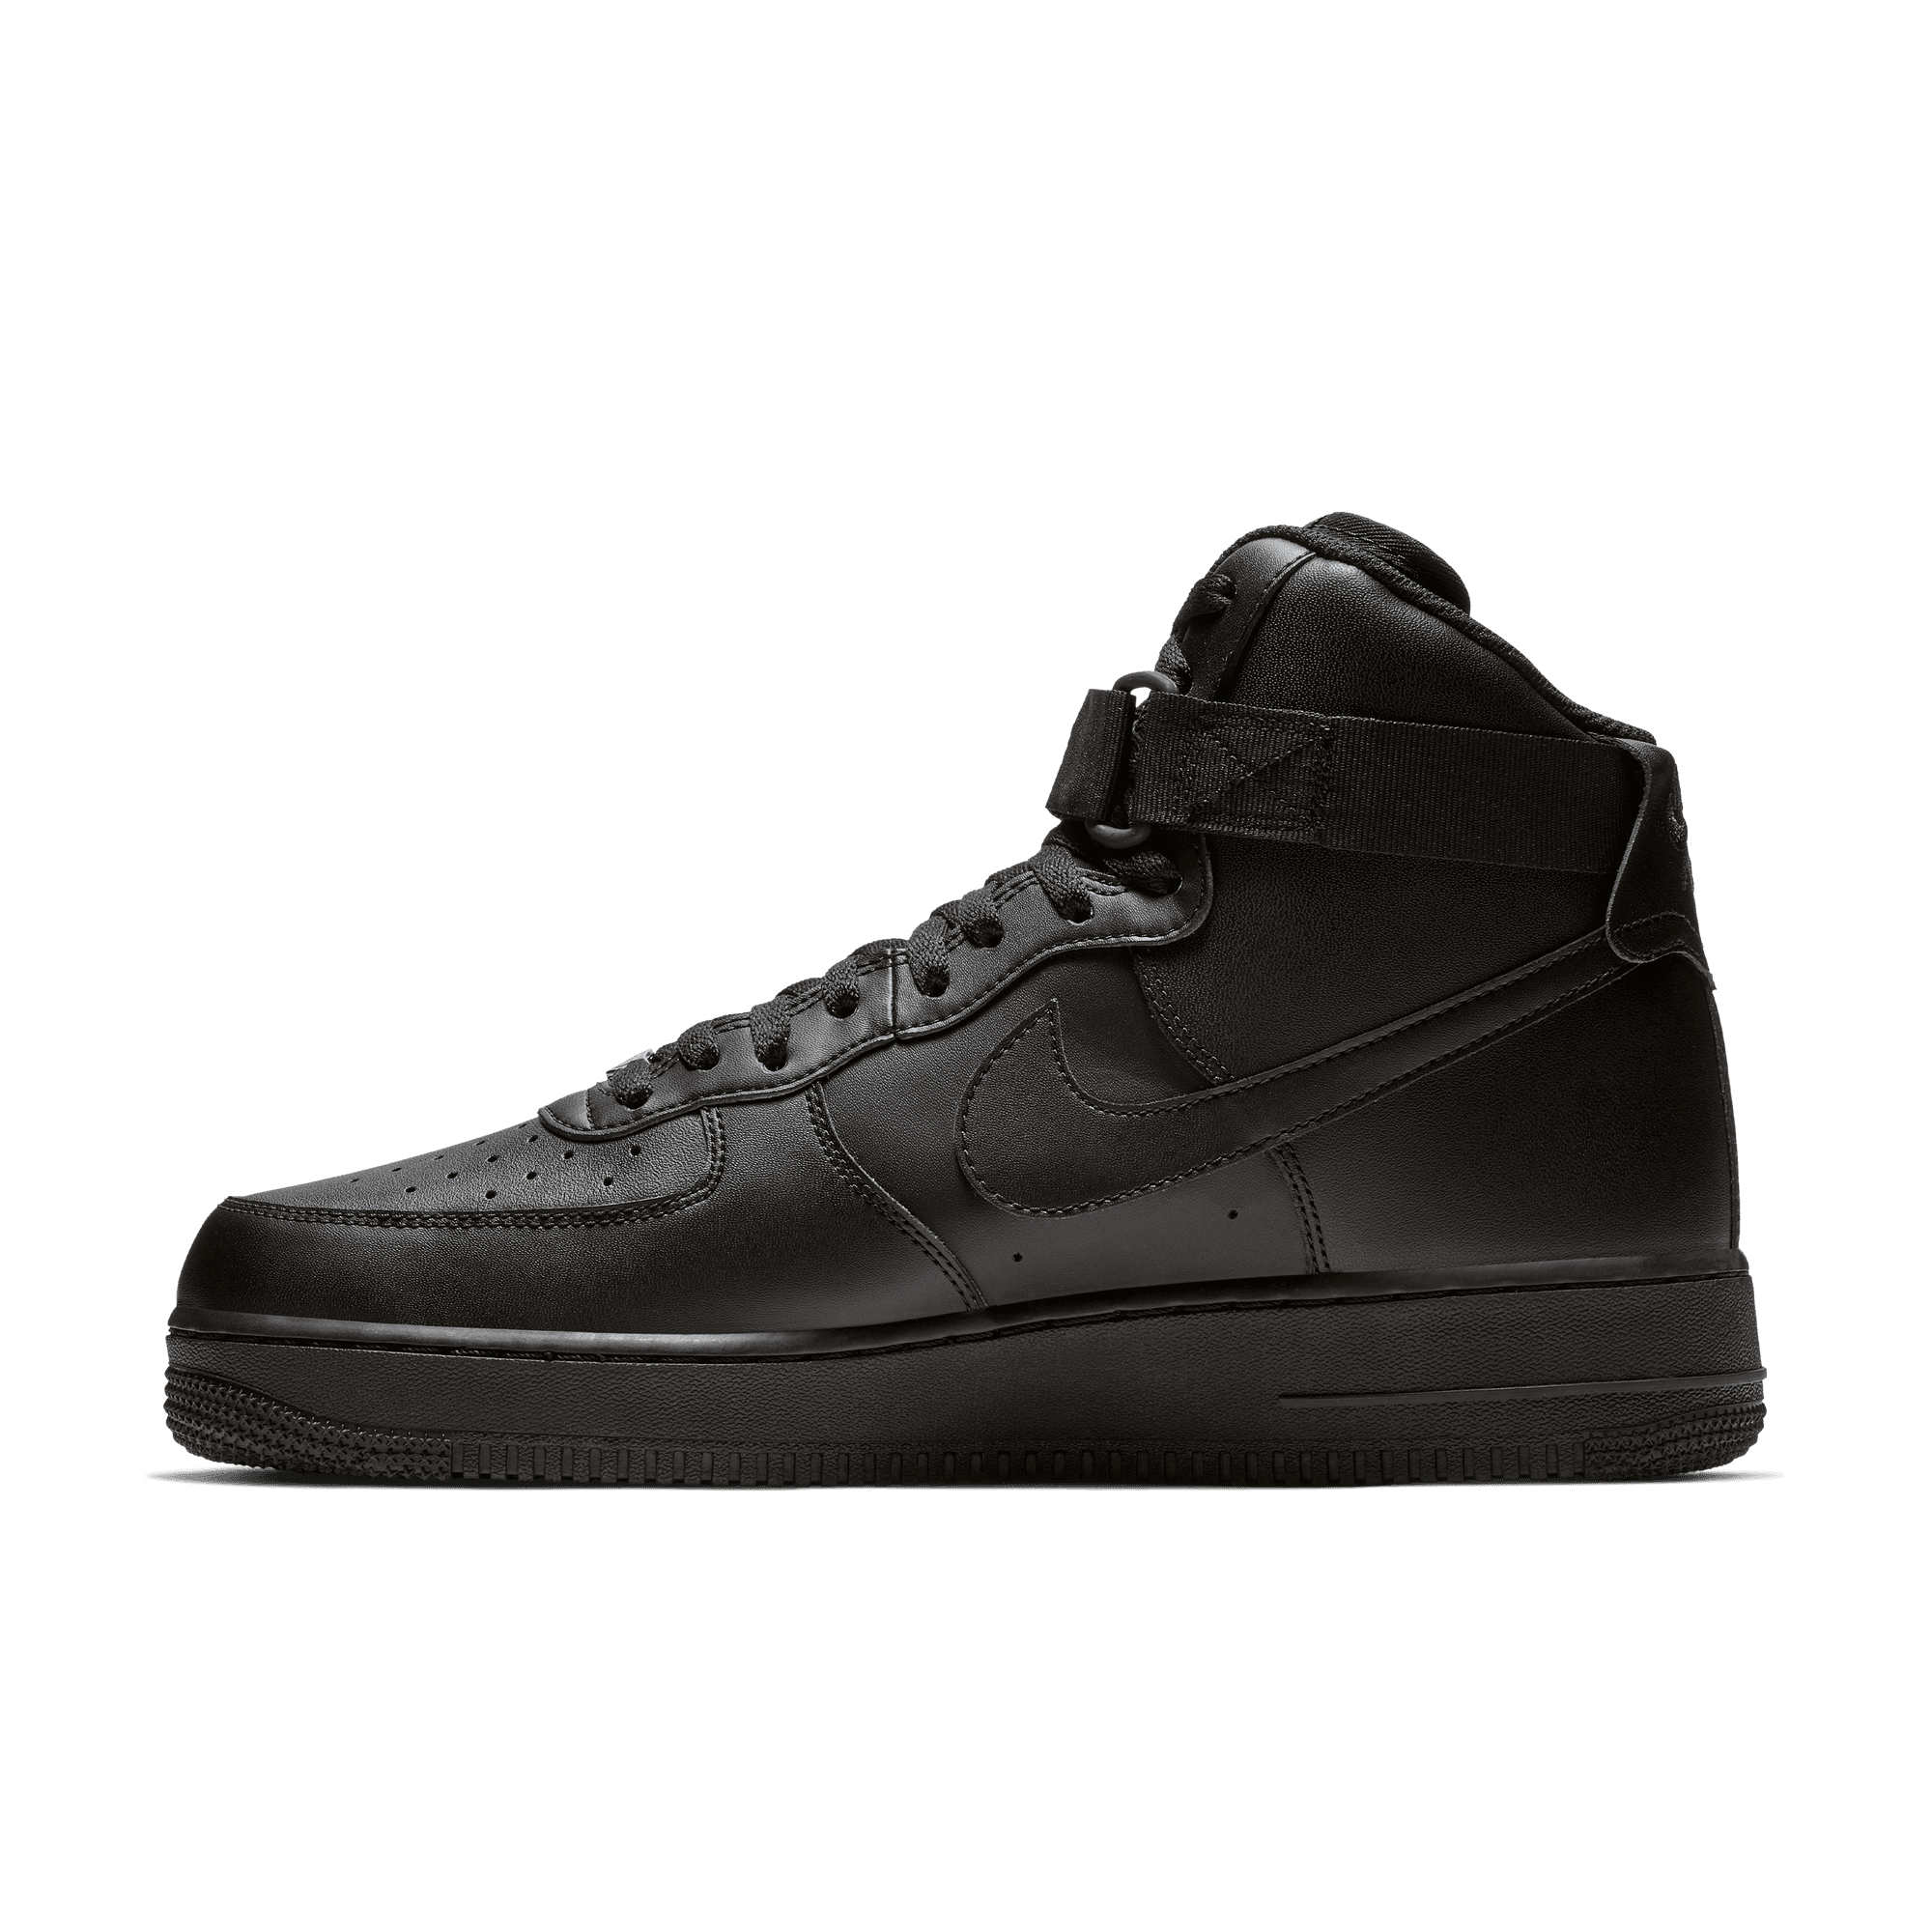 Nike Air Force 1 High '07 - SoleFly